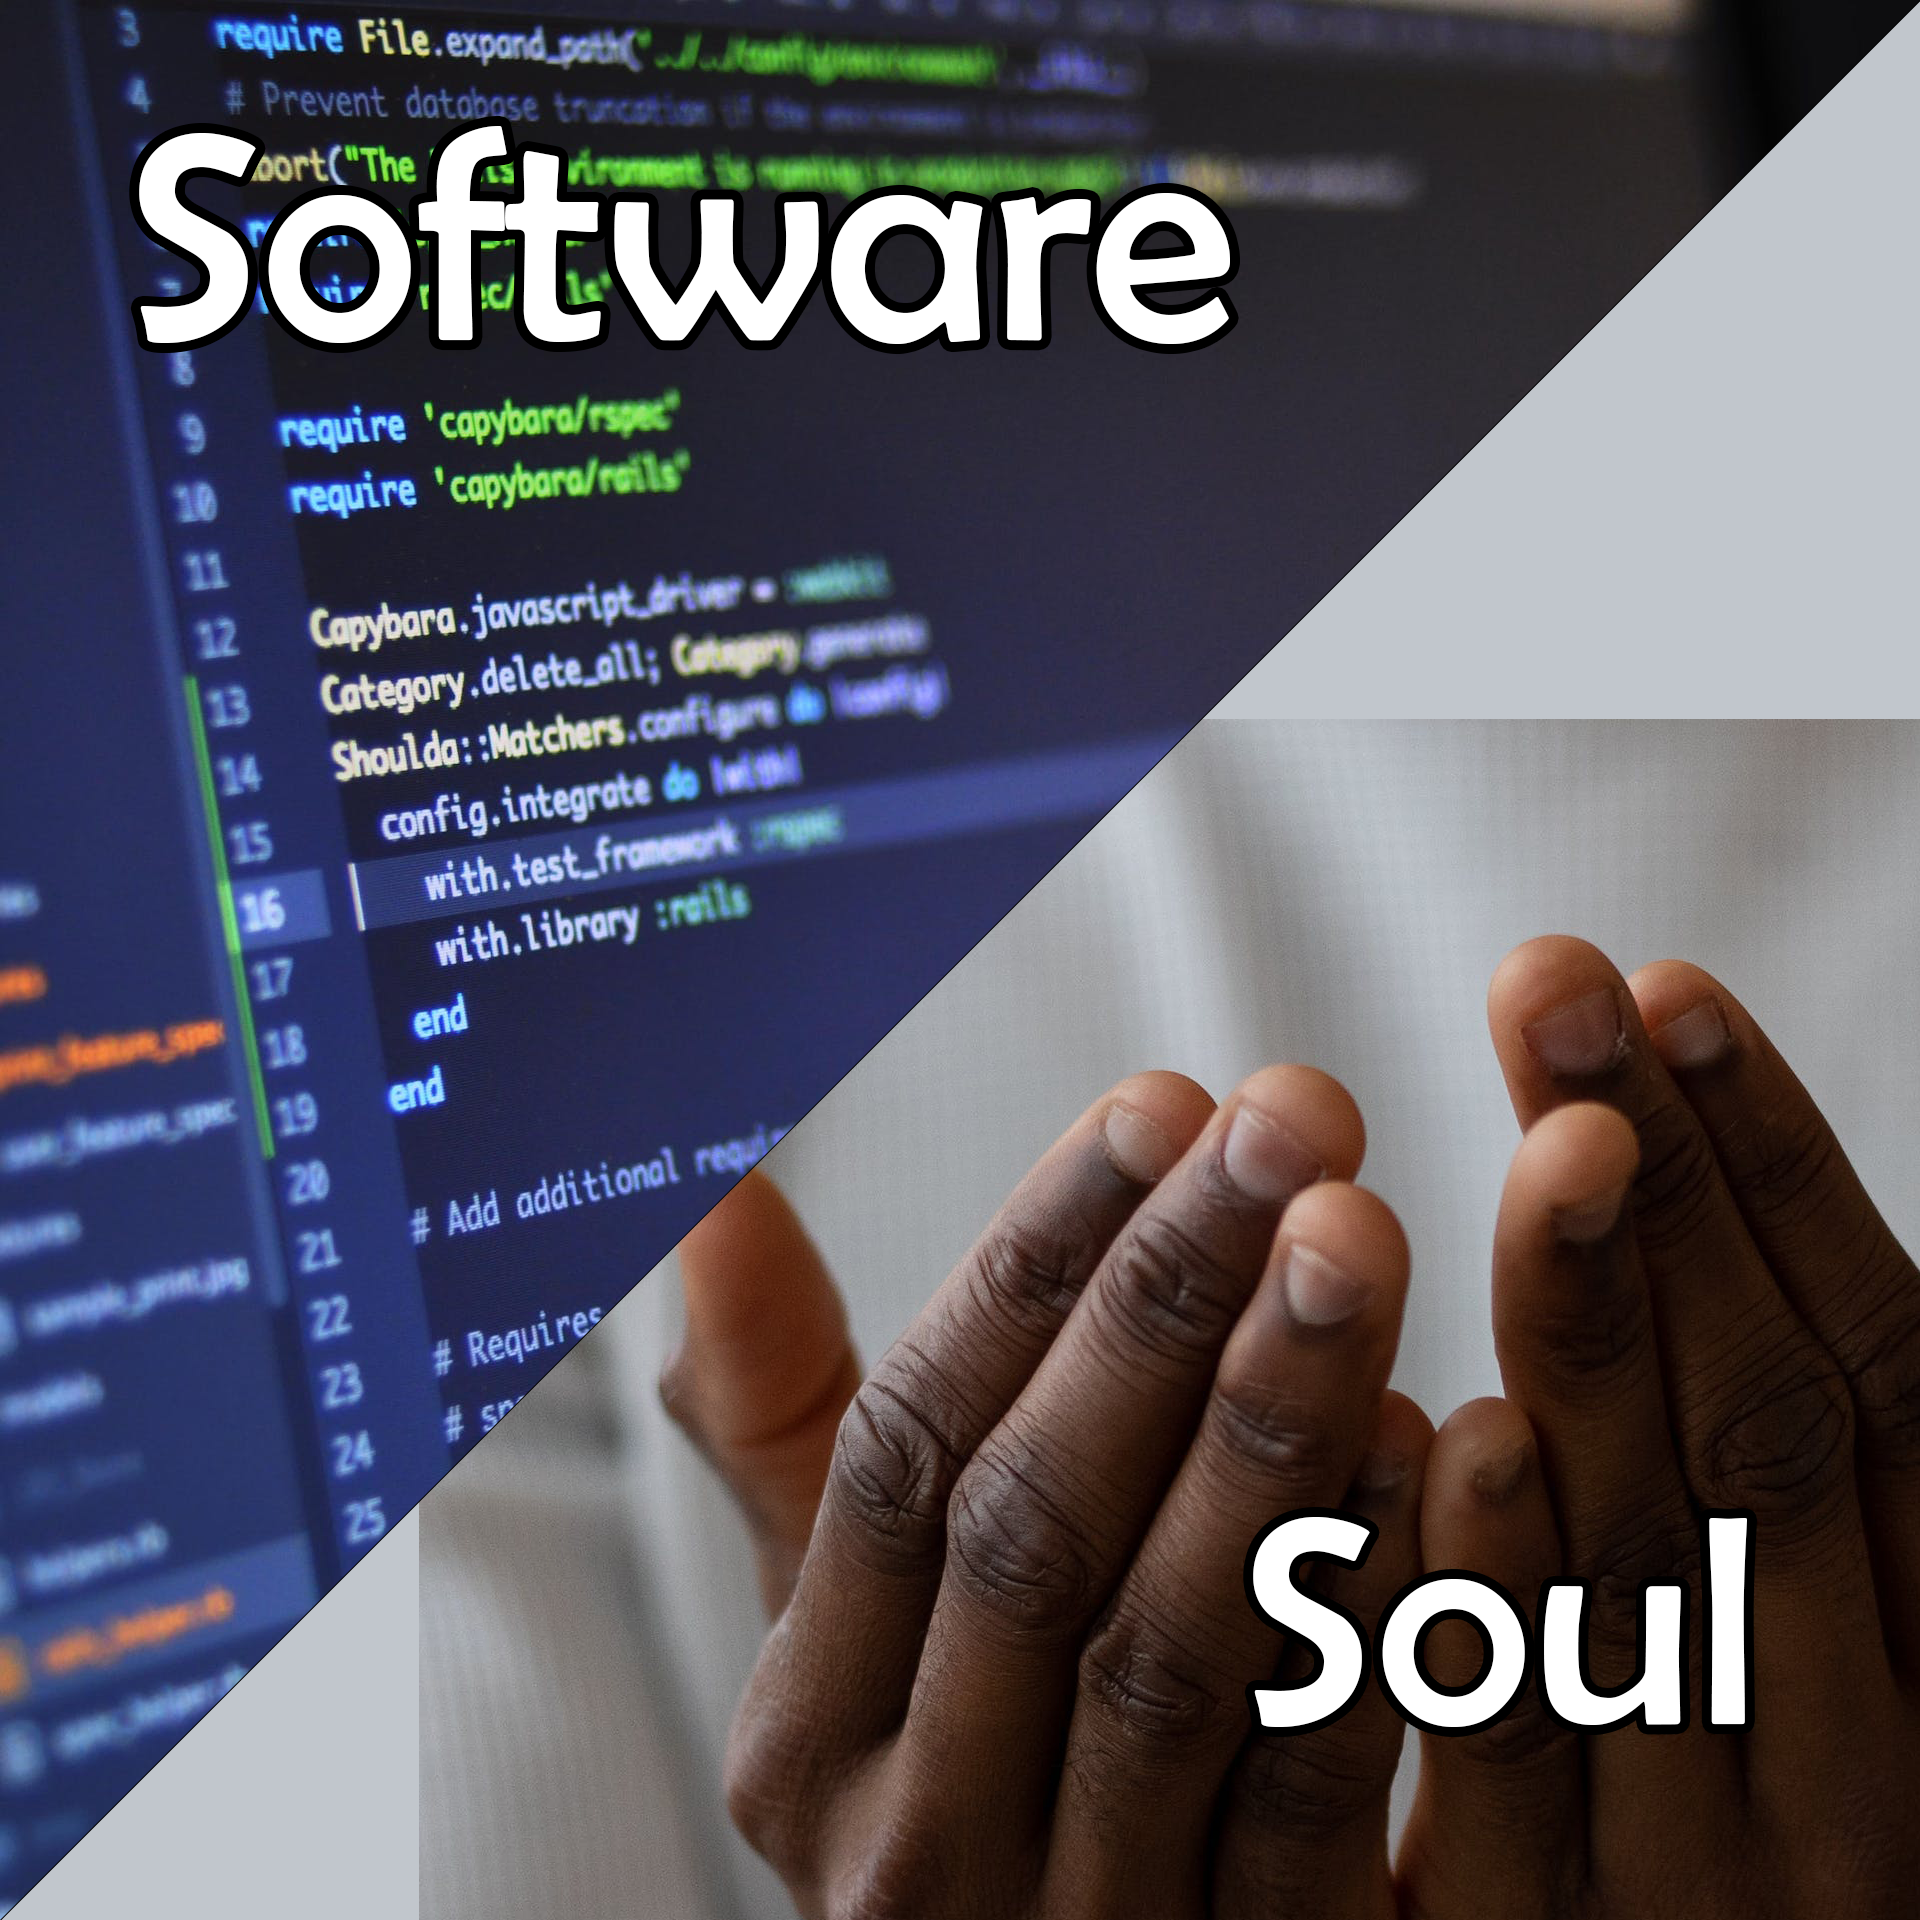 Software akin to the soul